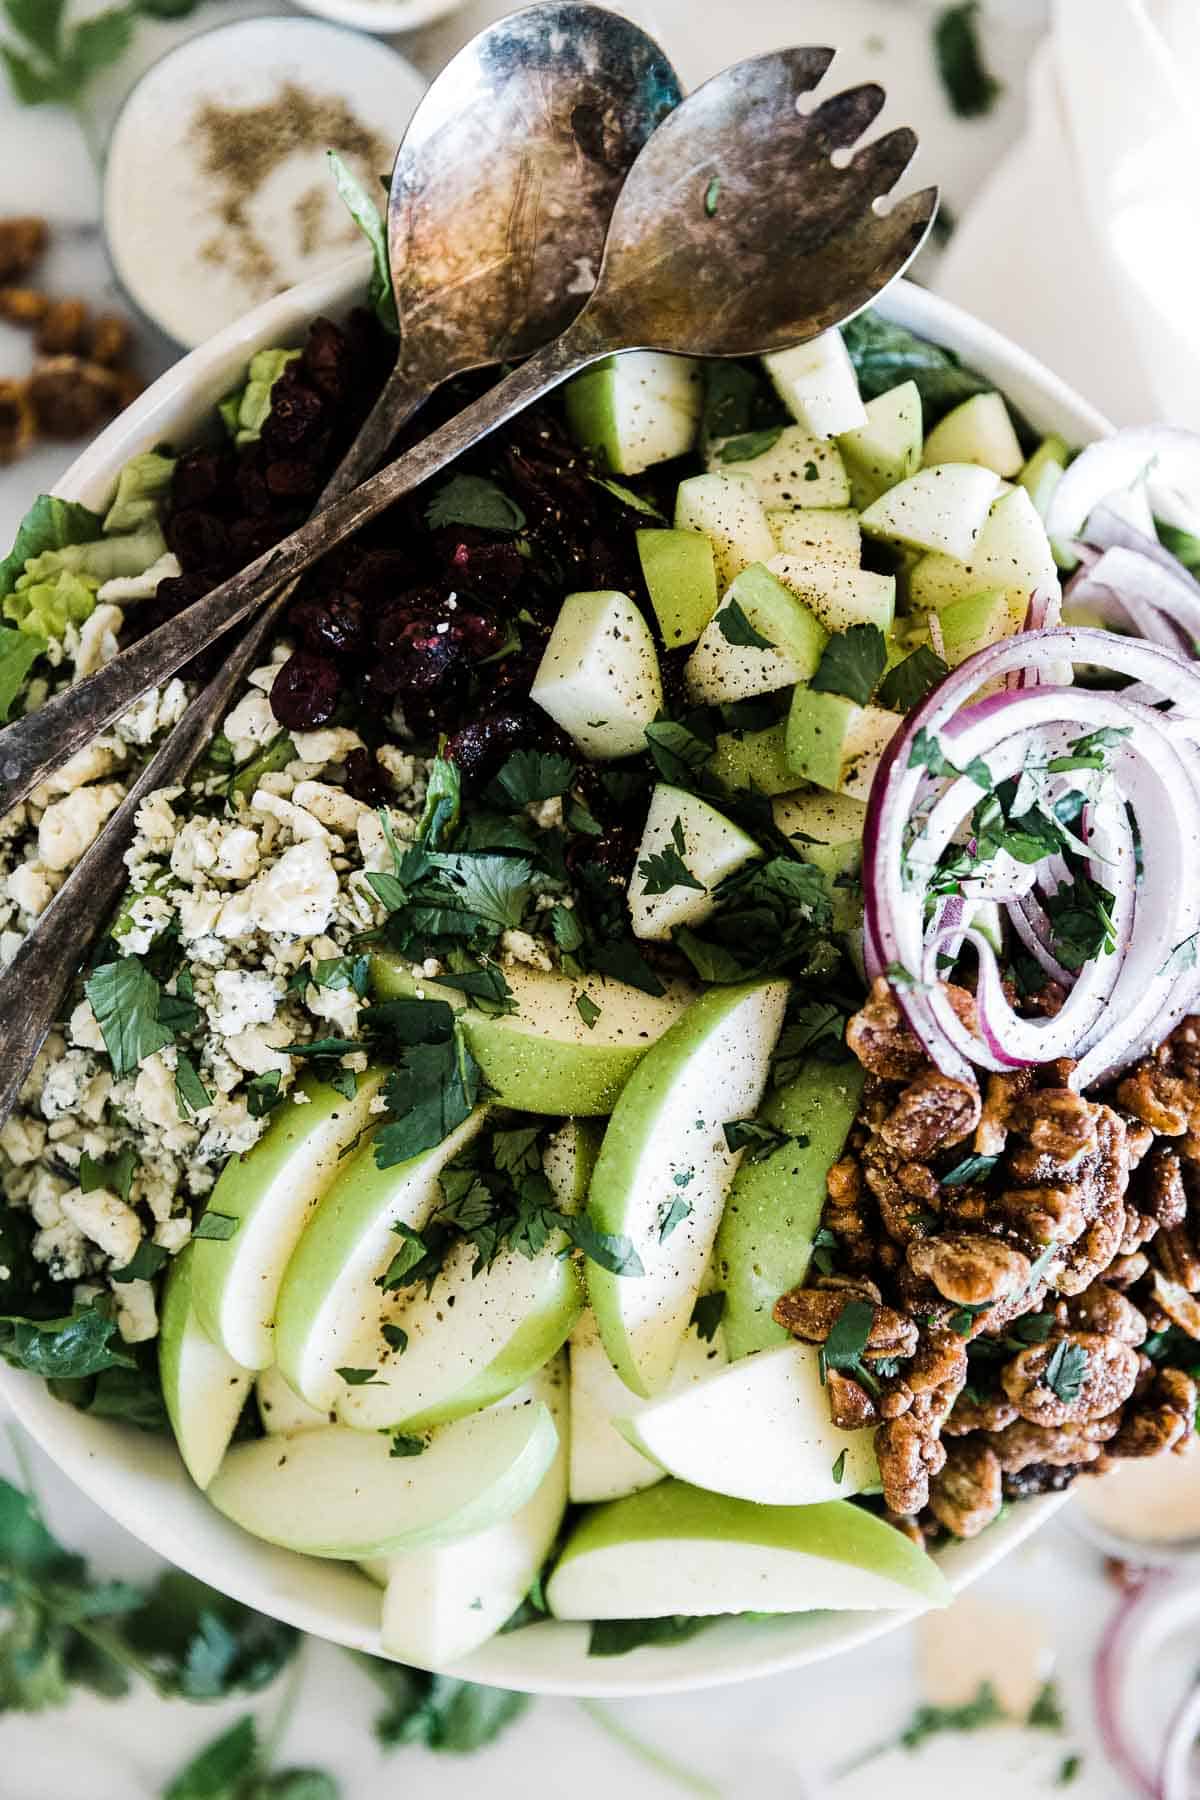 All the ingredients piled high on apple gorgonzola salad.